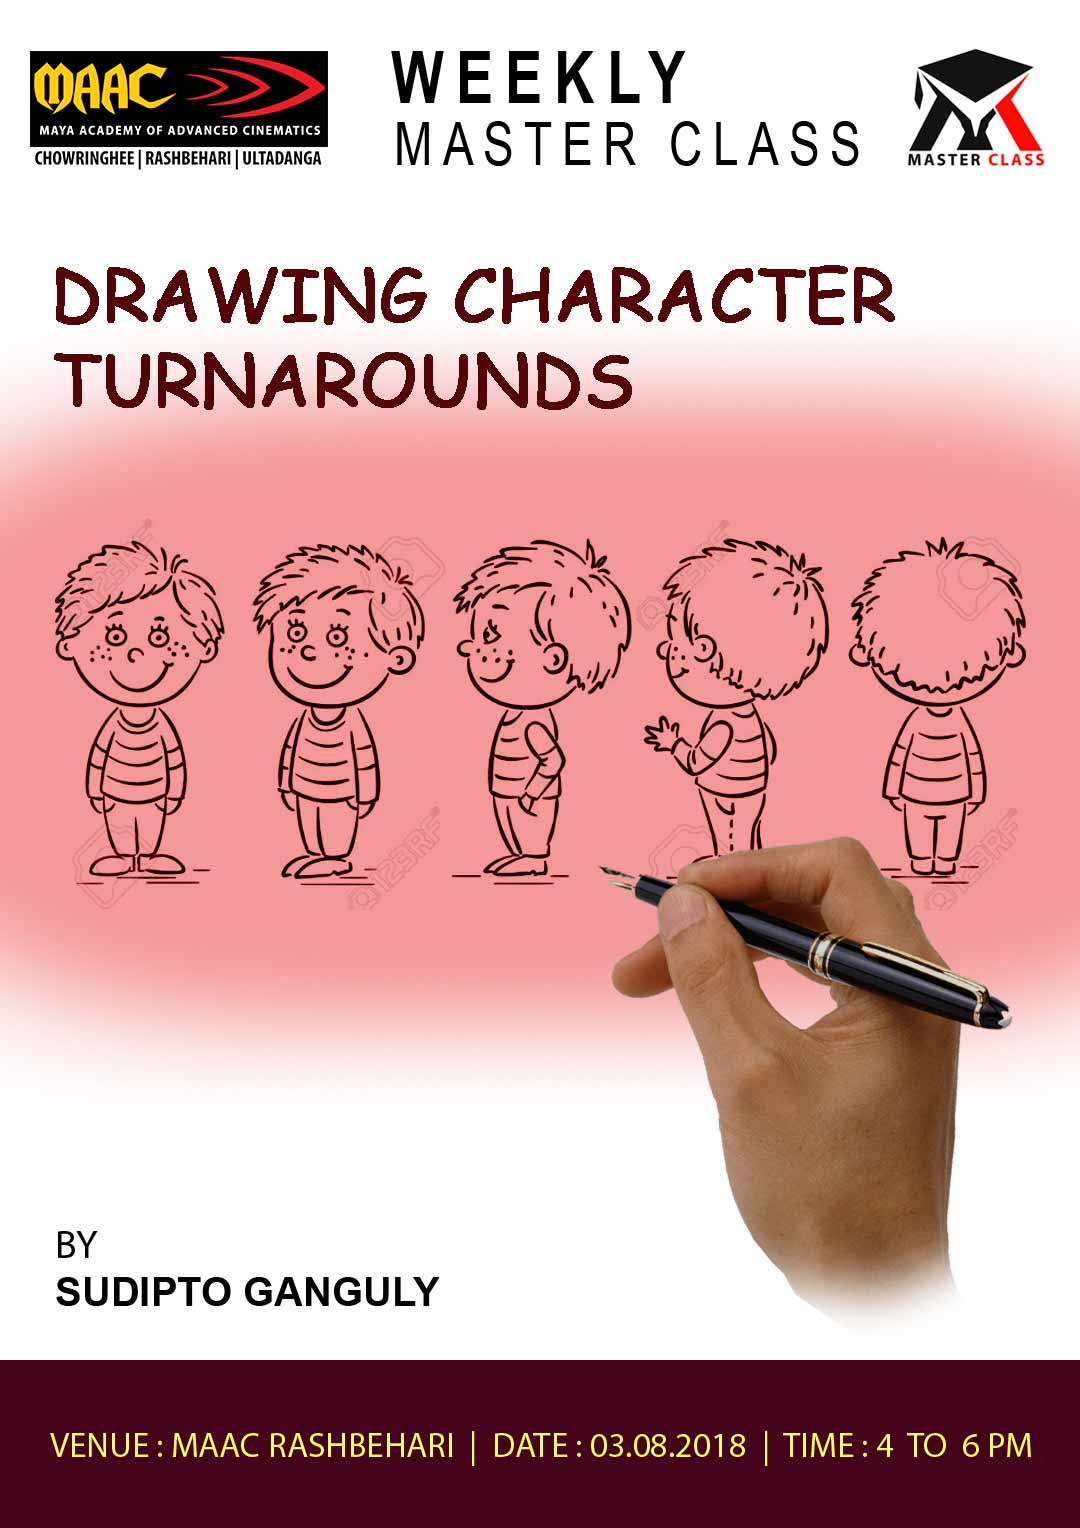 Weekly Master Class on Drawing Character Turnarounds